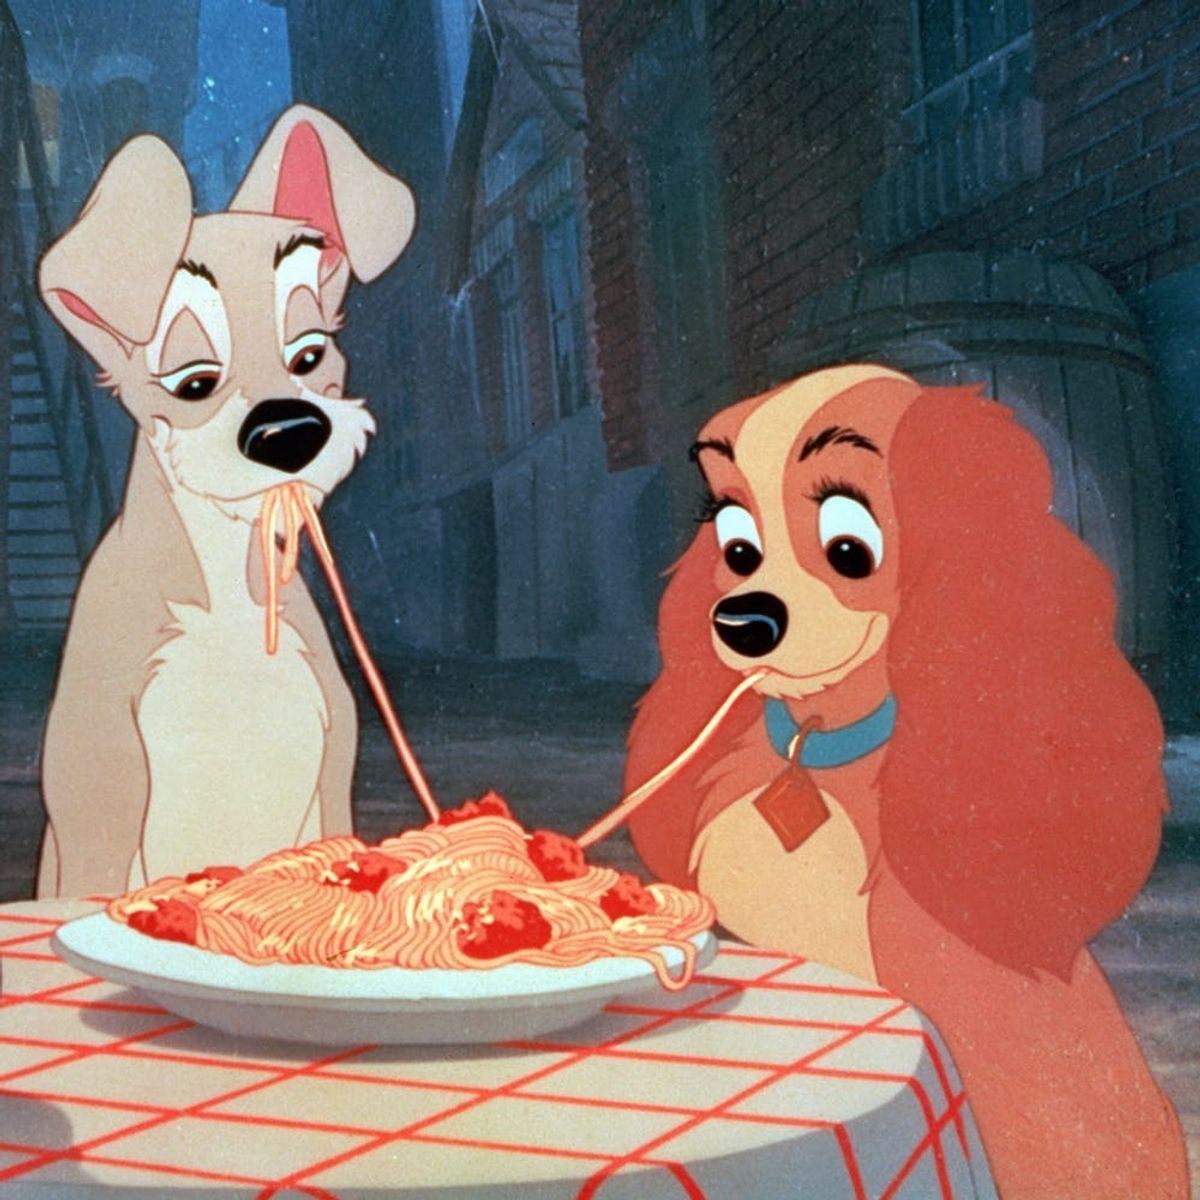 Disney’s ‘Lady and the Tramp’ Is Getting a Live-Action Remake and We Already Can’t Wait